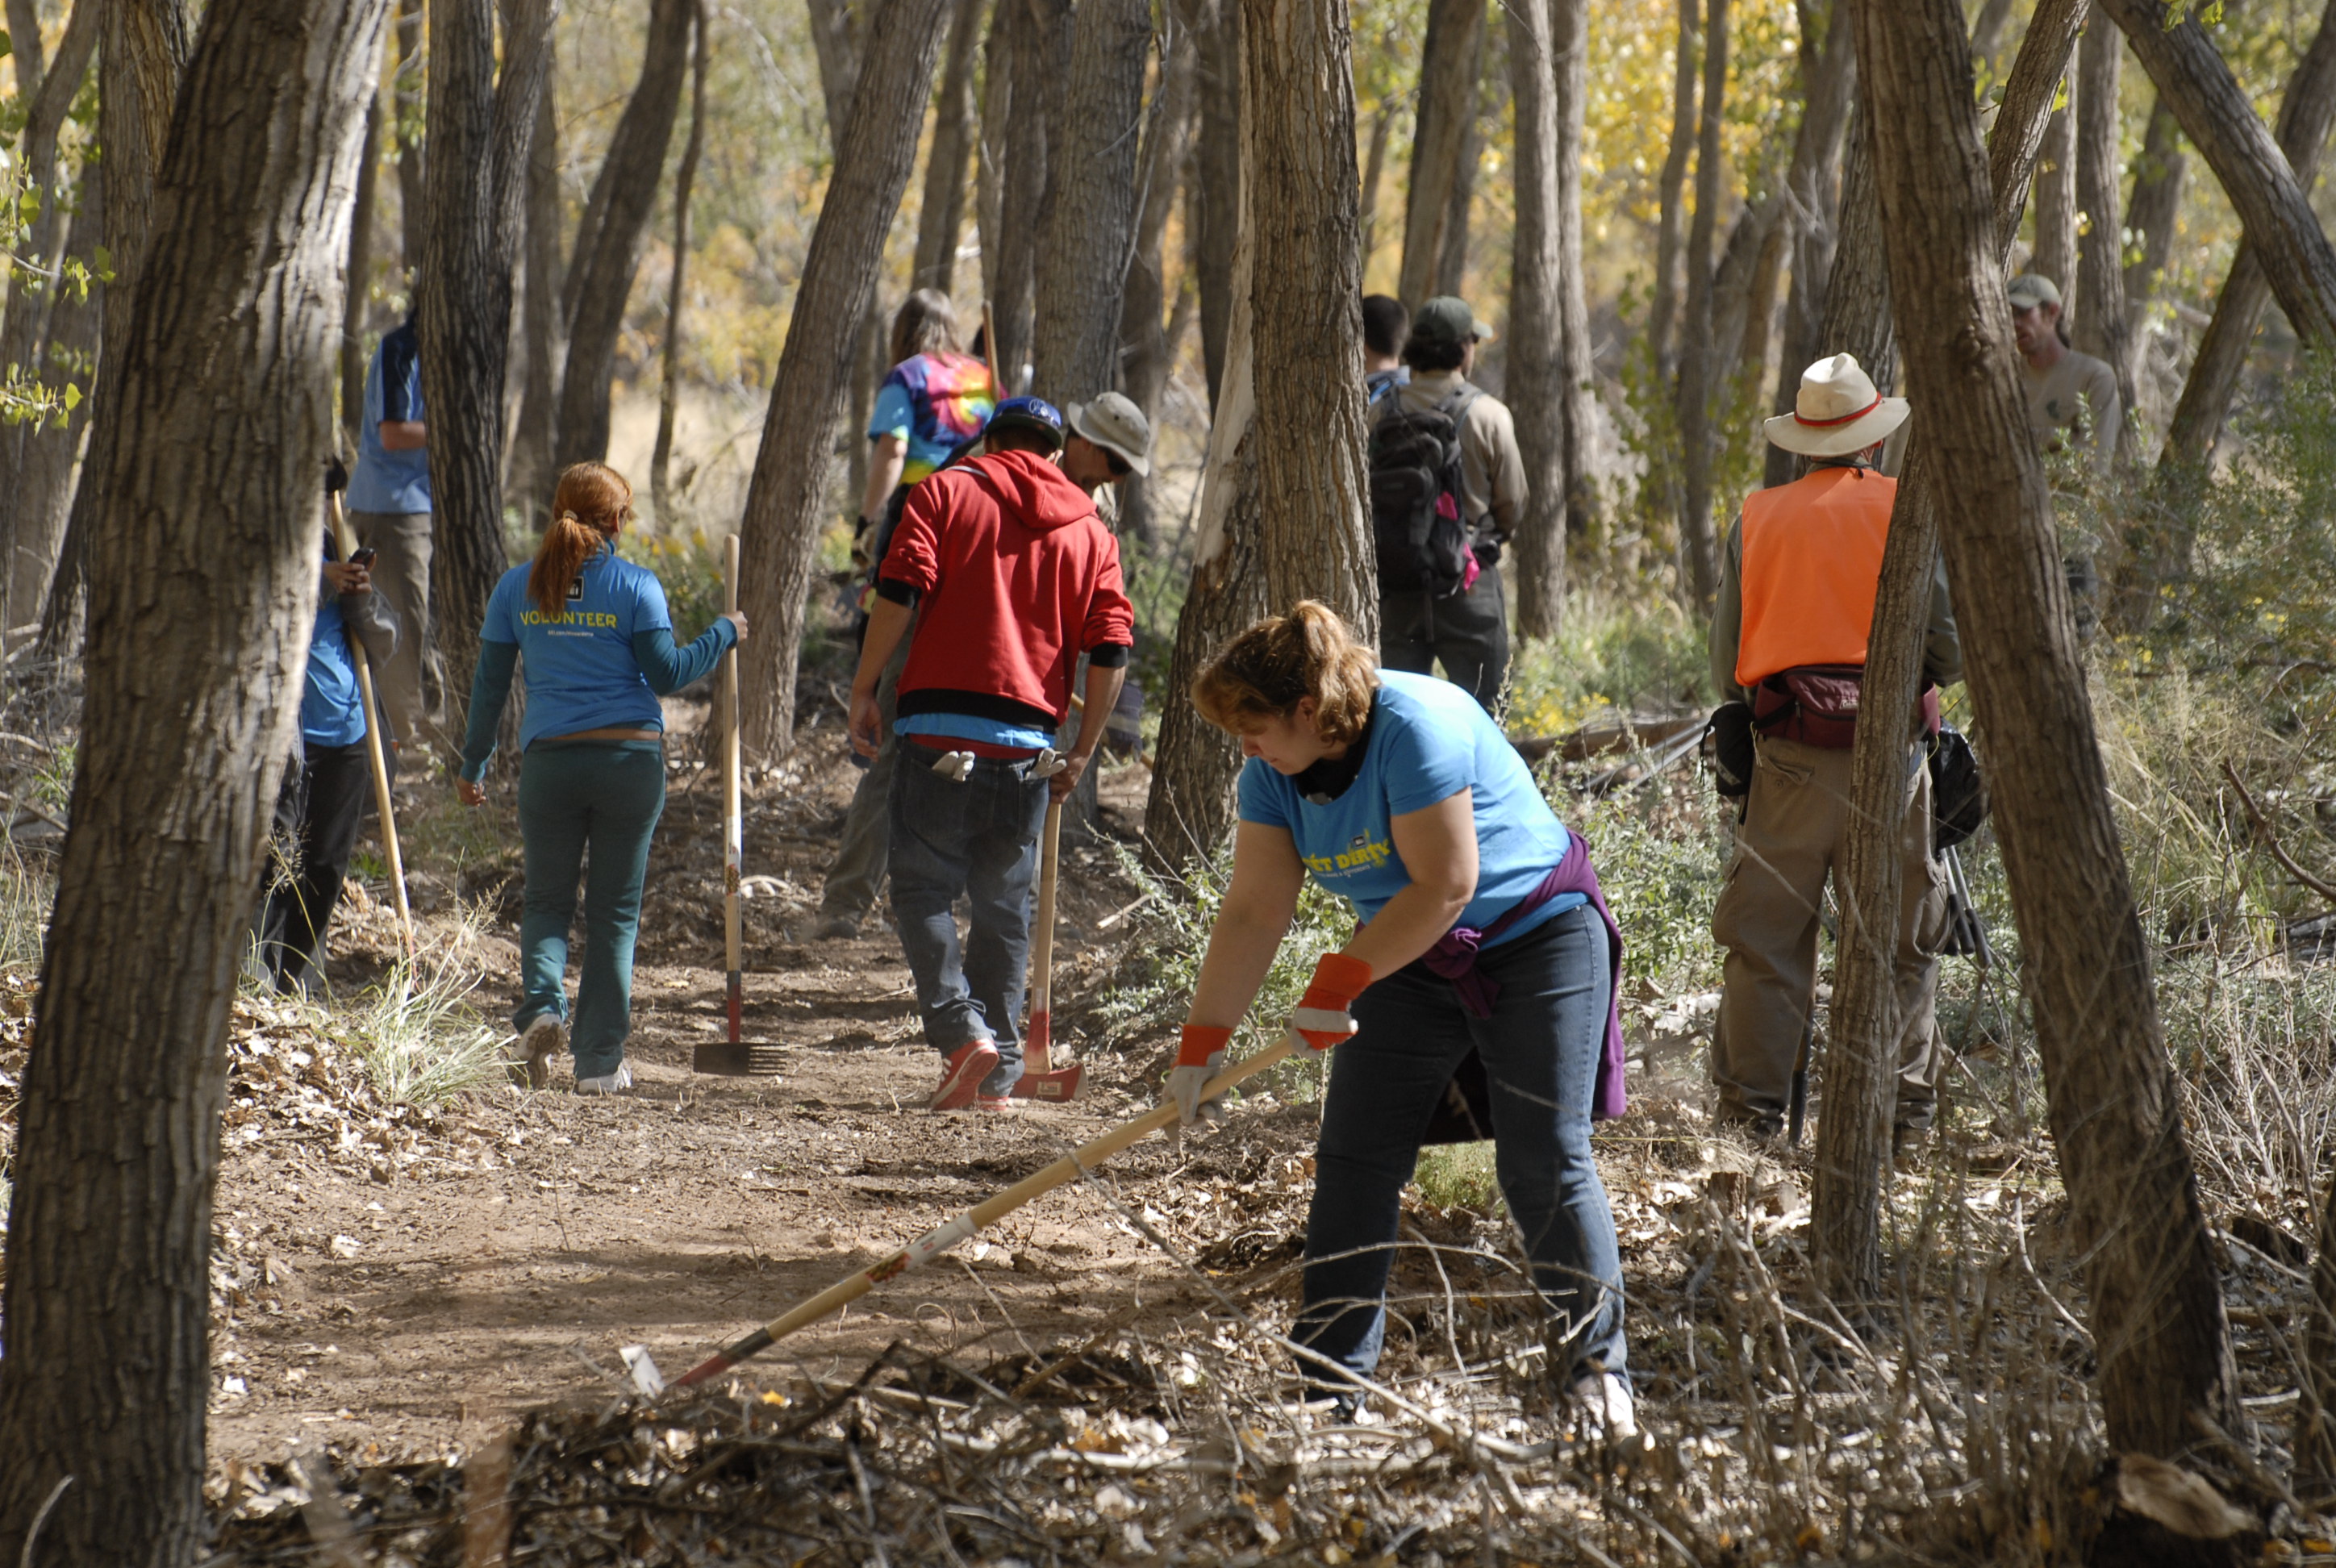 A group of volunteers using axes and hoes to maintain a trail in the woods.